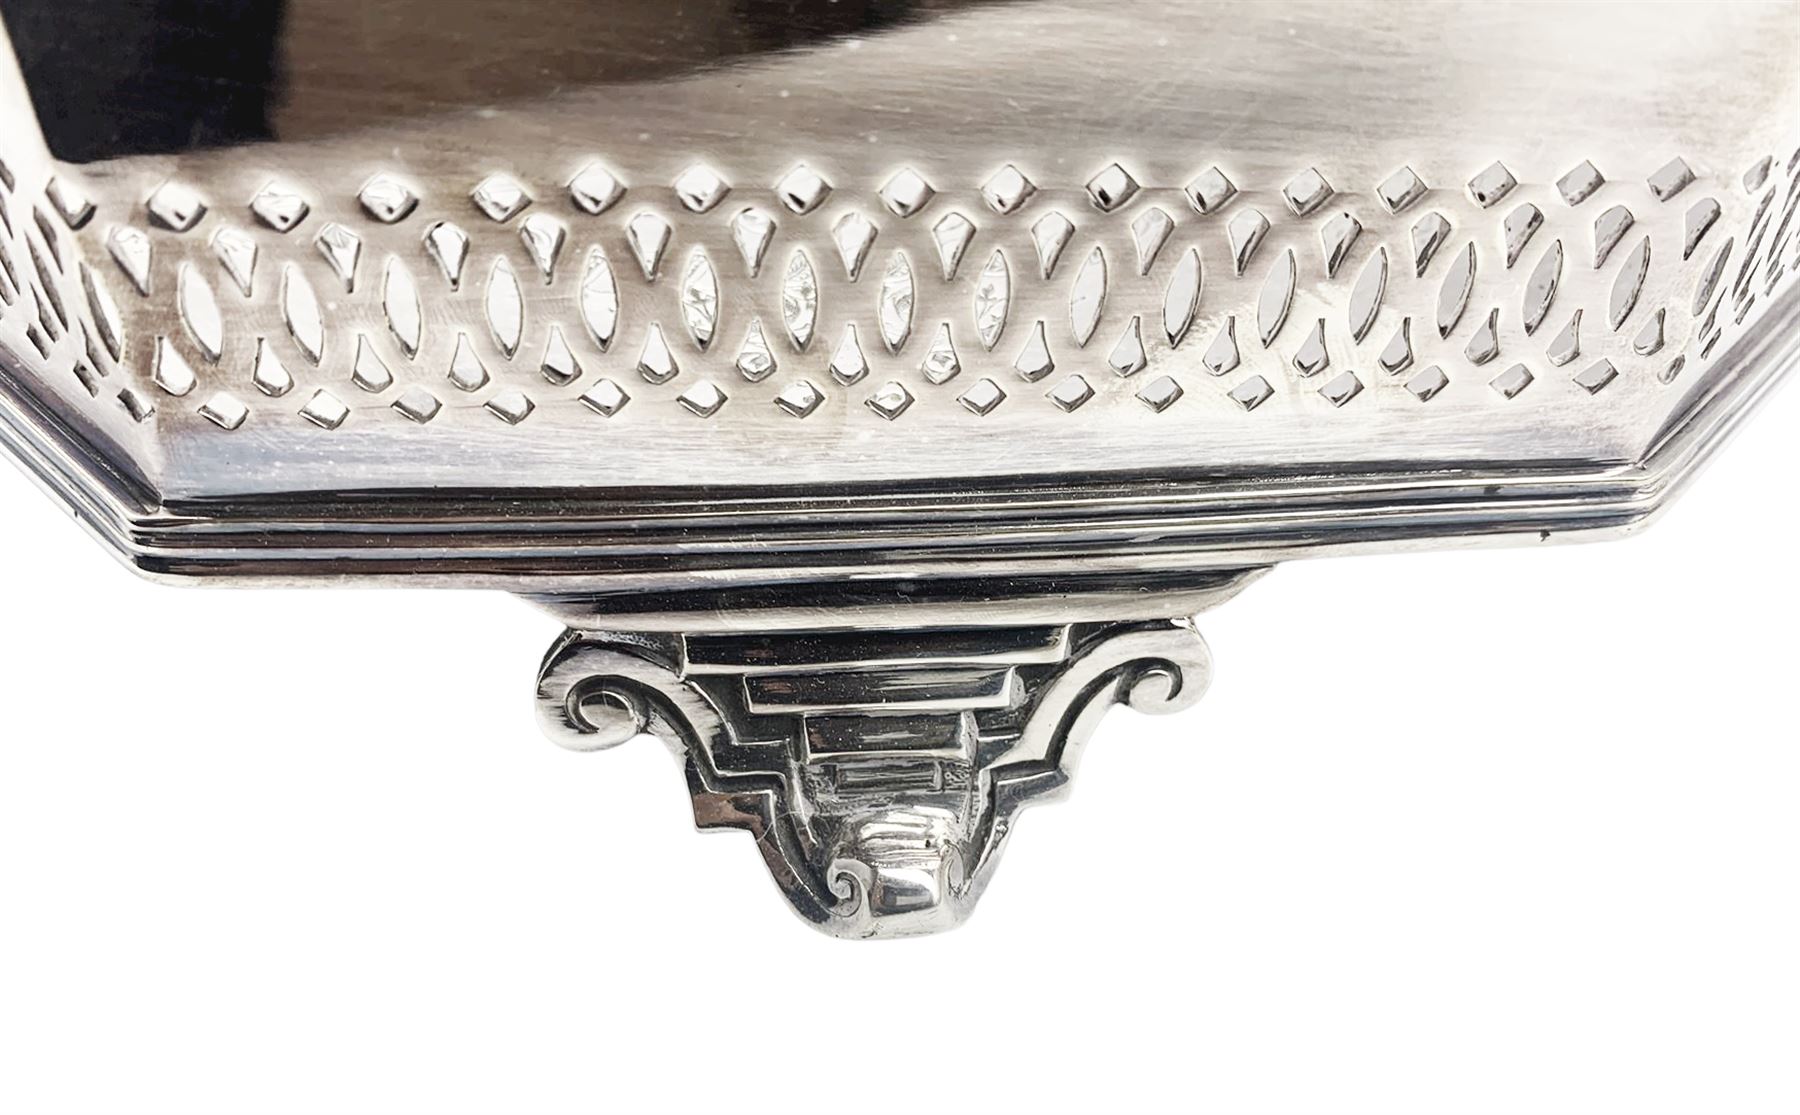 Early 20th century silver-plated tea tray by James Deakin & Sons - Image 6 of 8